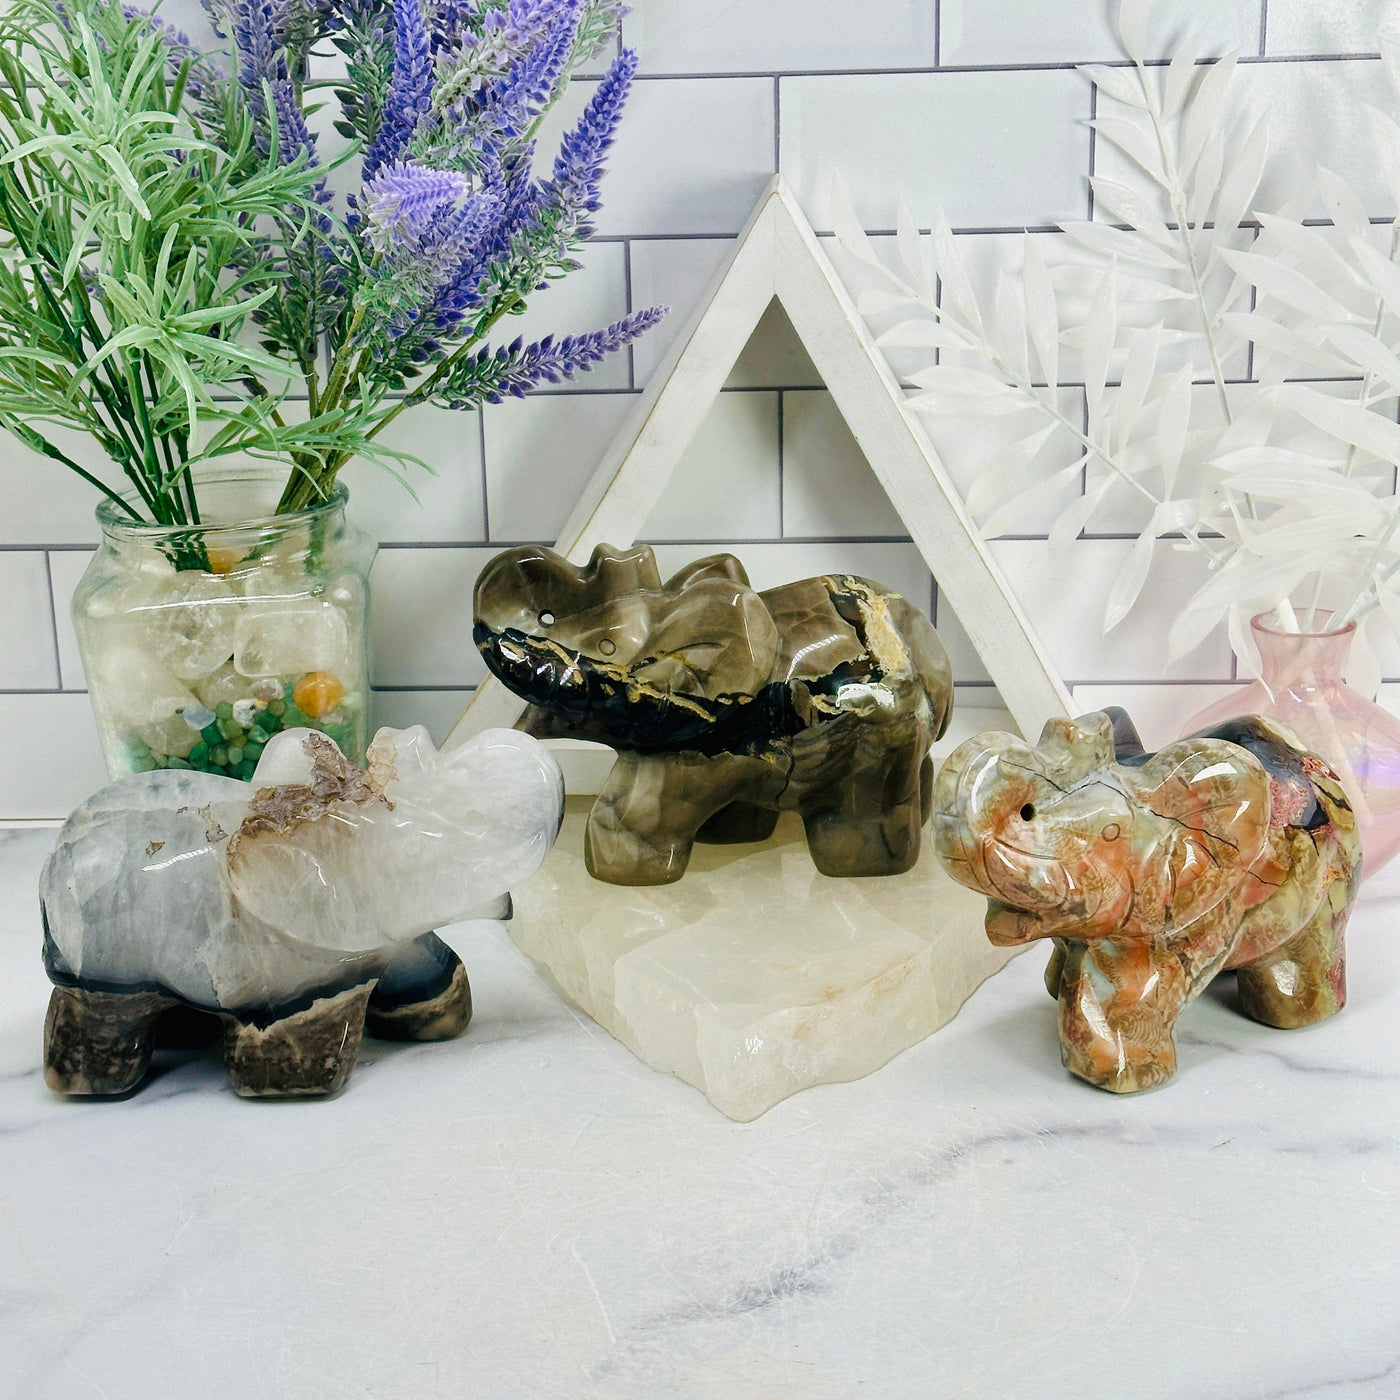 Lava Agate Crystal Carved Elephants - YOU CHOOSE all elephant variants at different angles arranged on marble textured ground and white brick pattern wall with props in backround